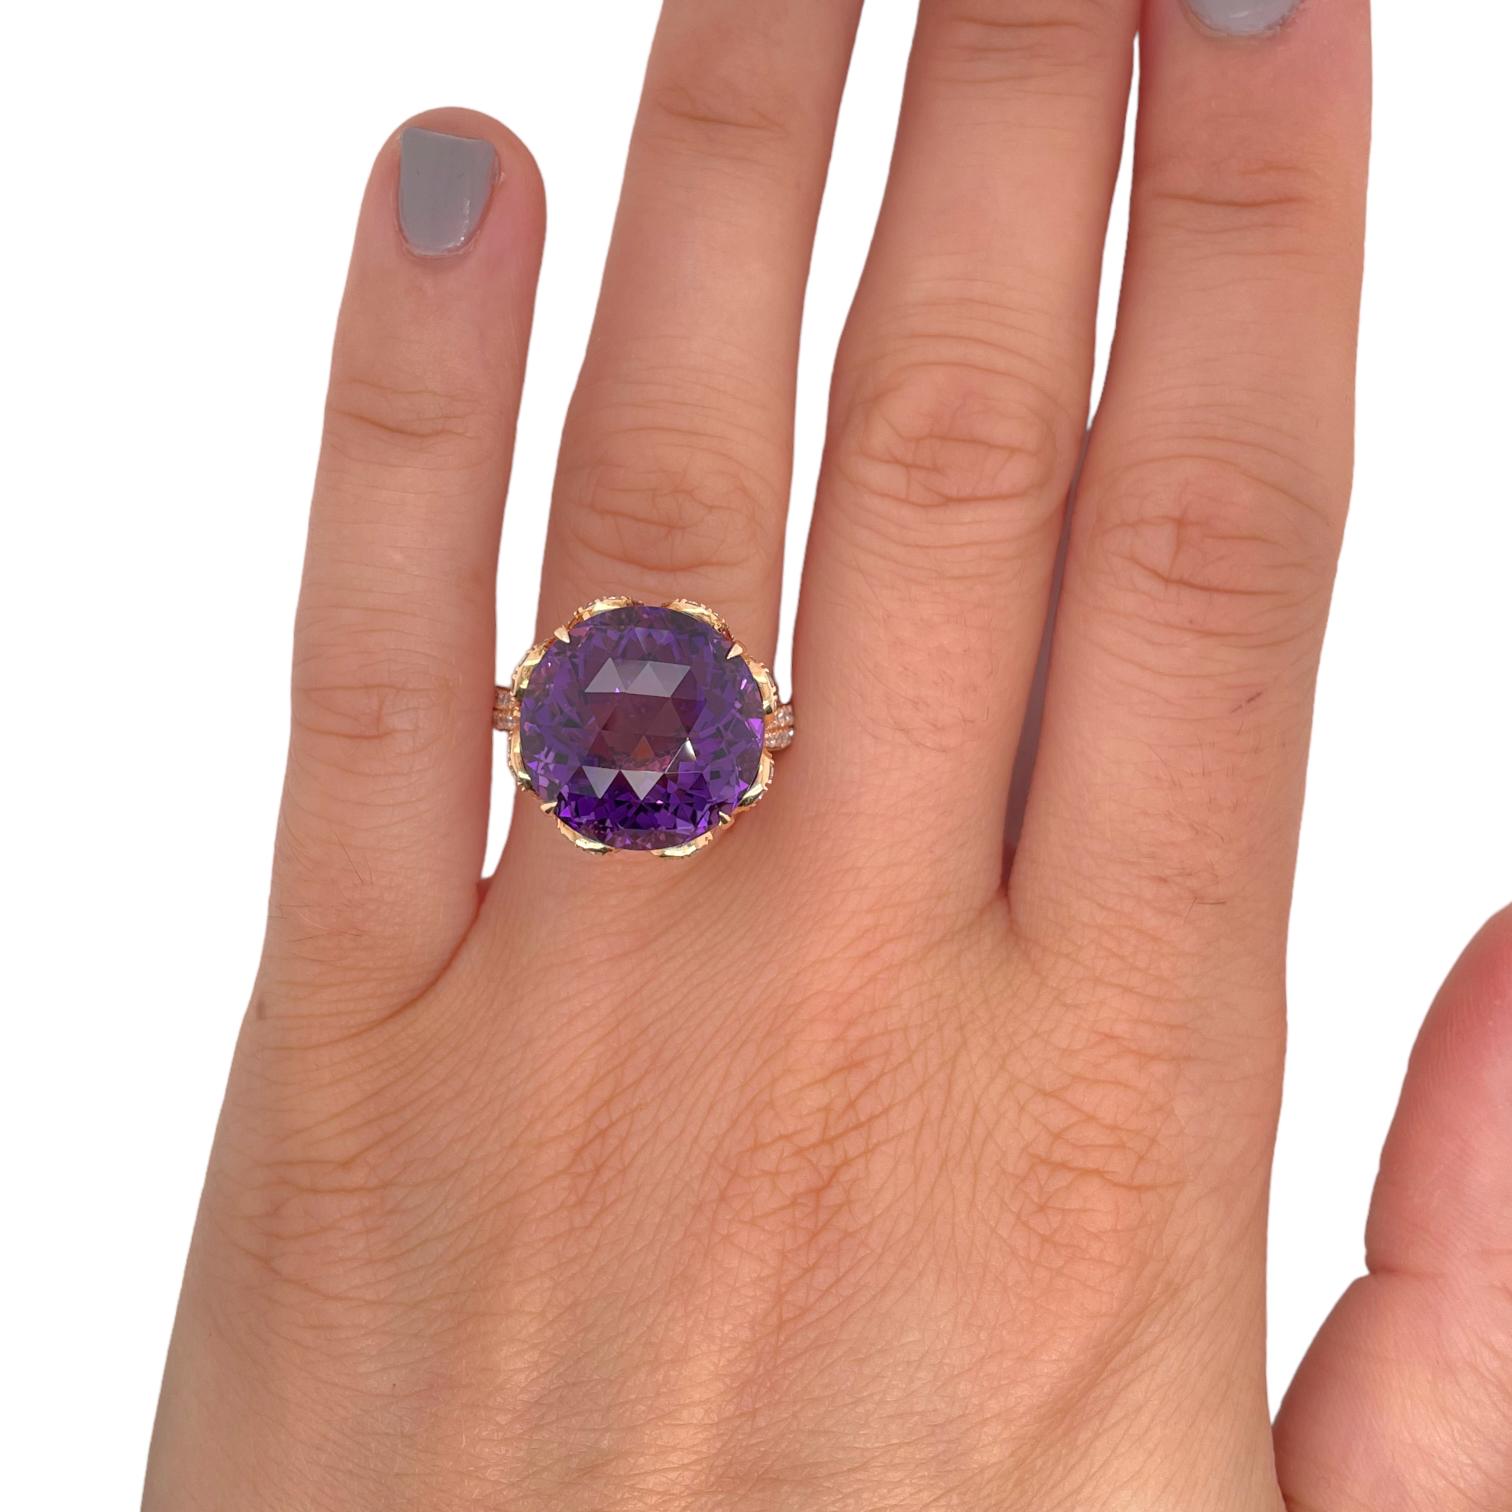 Ring contains one center round checkerboard cut amethyst, 13.43ct. Center stone is accented by round brilliant diamonds, 0.63tcw. Diamonds are colorless and VS2 in clarity. 
Ring can be resized to desired measurement. Please request